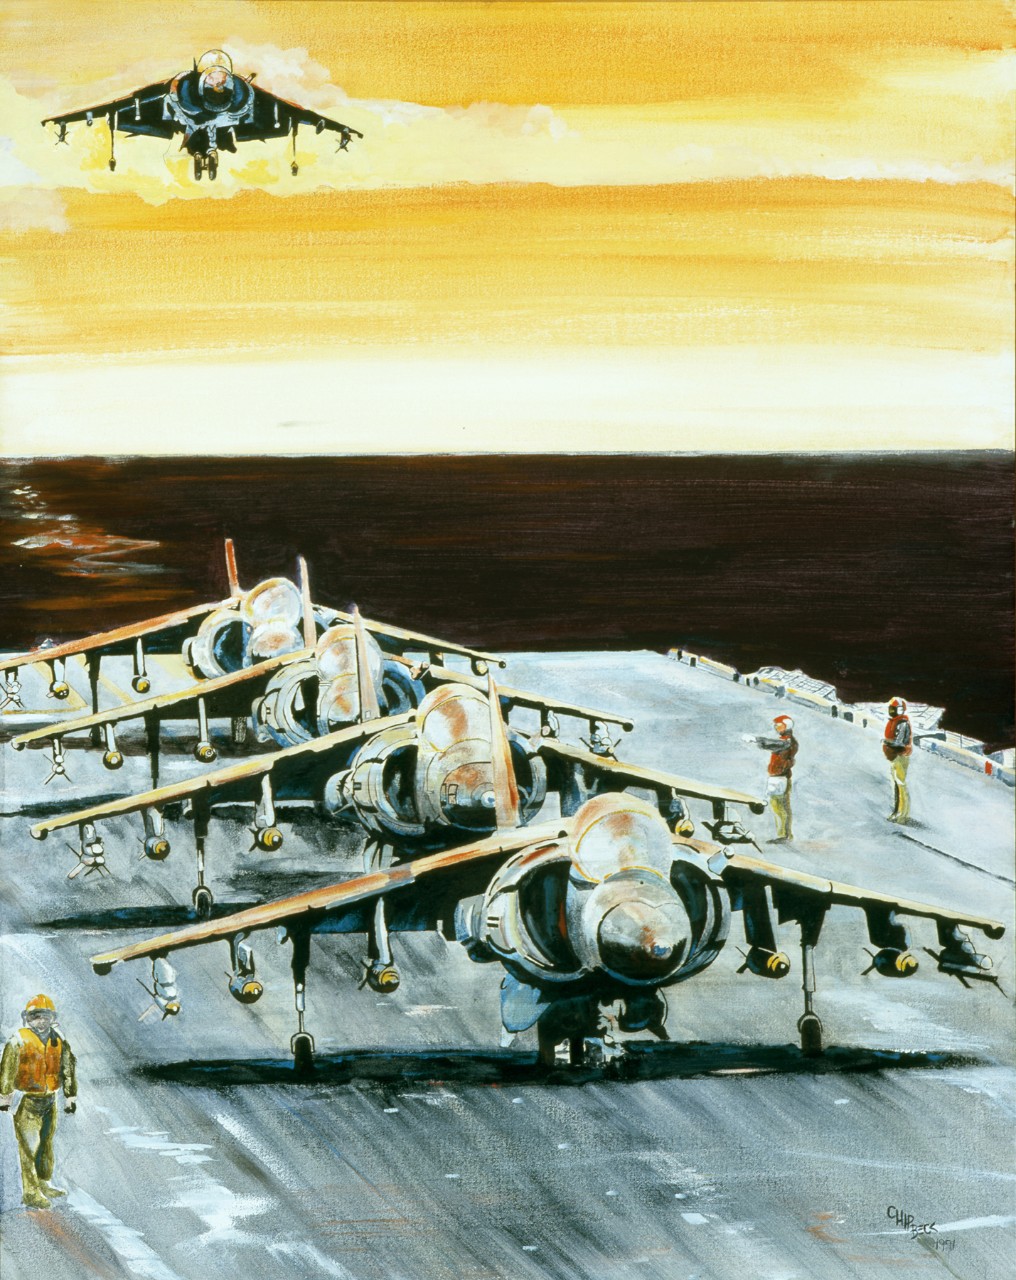 A plane comes in for a landing on a carrier with planes lined up on deck